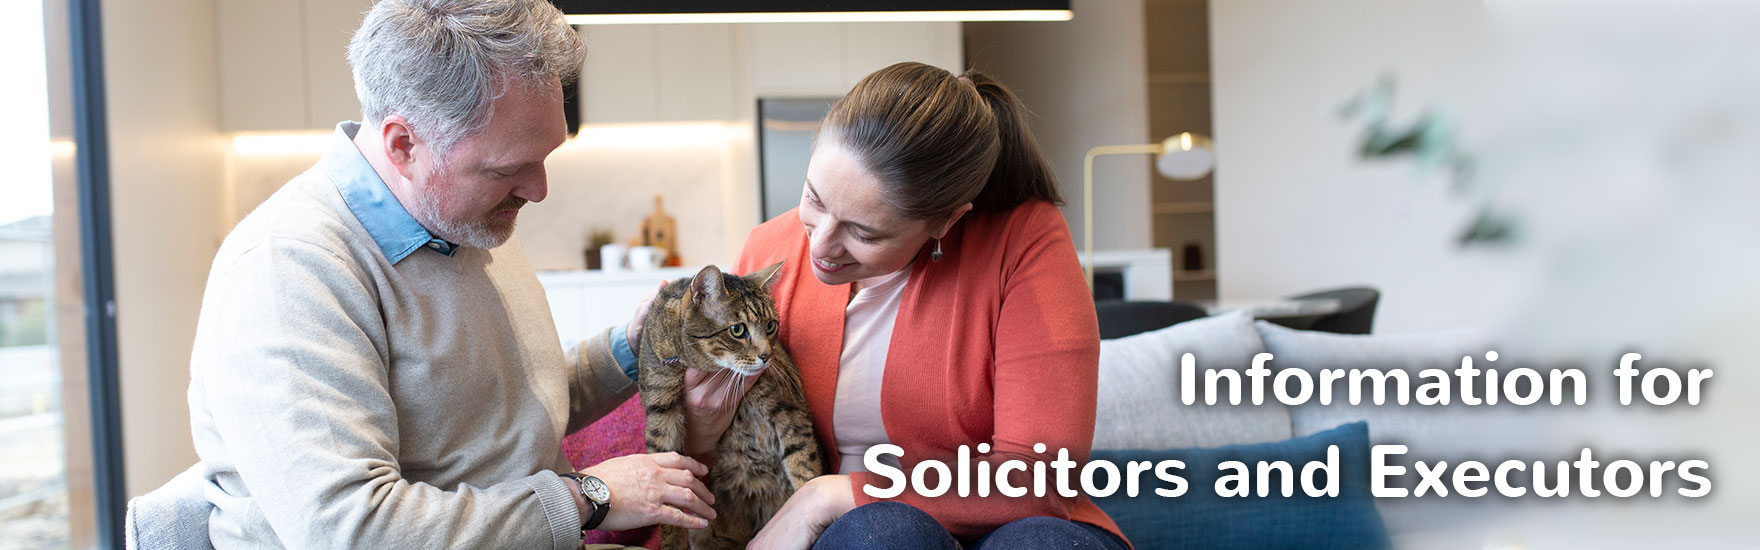 Information for Solicitors and Executors